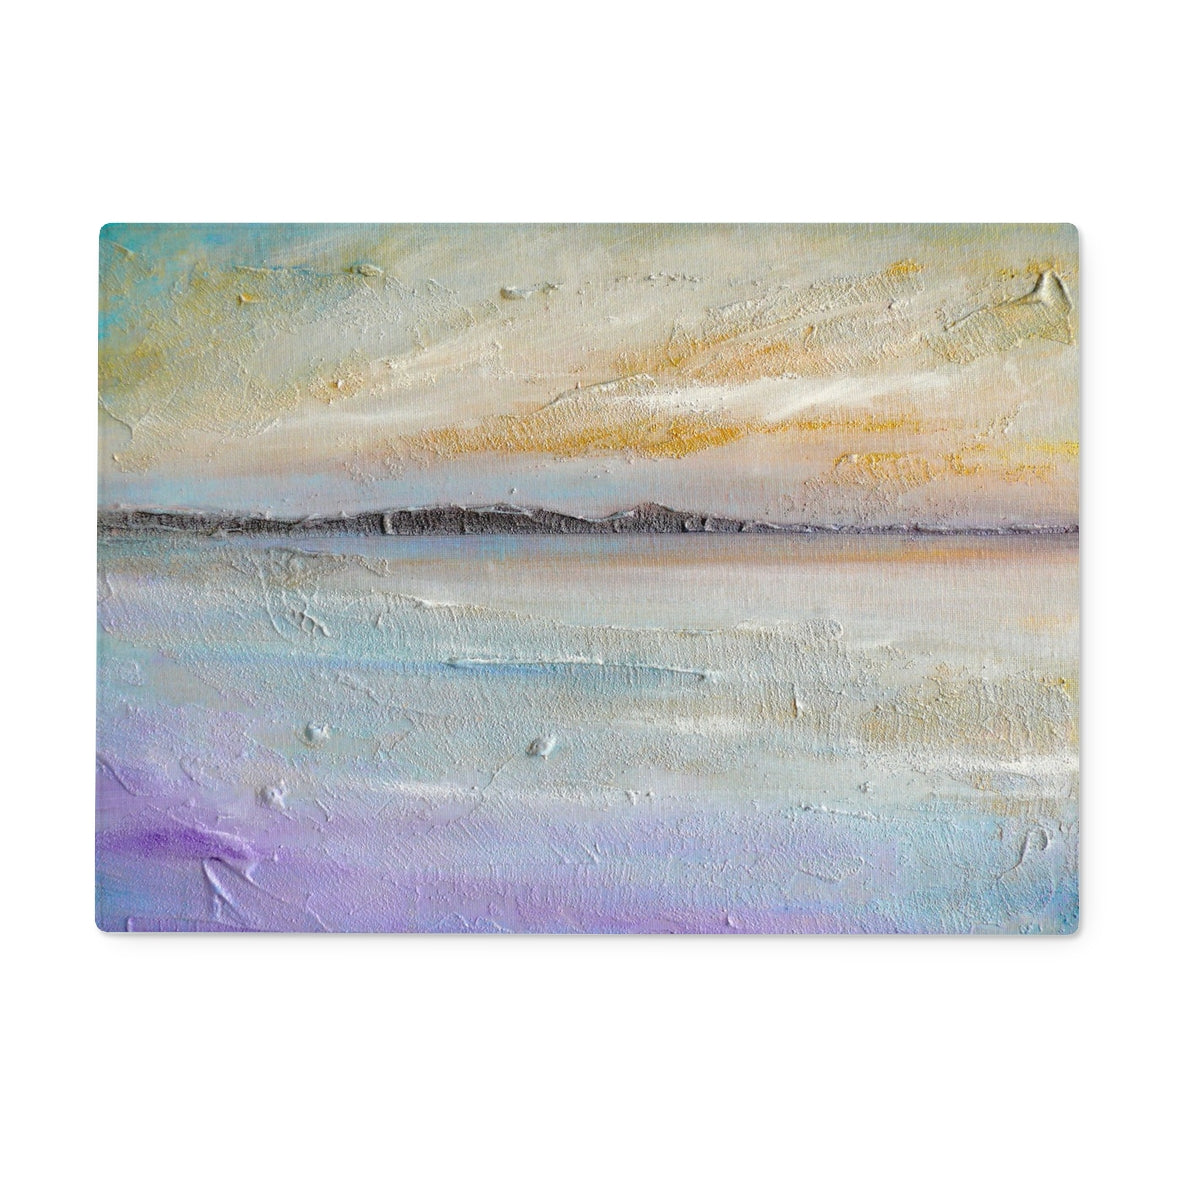 Sollas Beach South Uist Art Gifts Glass Chopping Board-Glass Chopping Boards-Hebridean Islands Art Gallery-15"x11" Rectangular-Paintings, Prints, Homeware, Art Gifts From Scotland By Scottish Artist Kevin Hunter